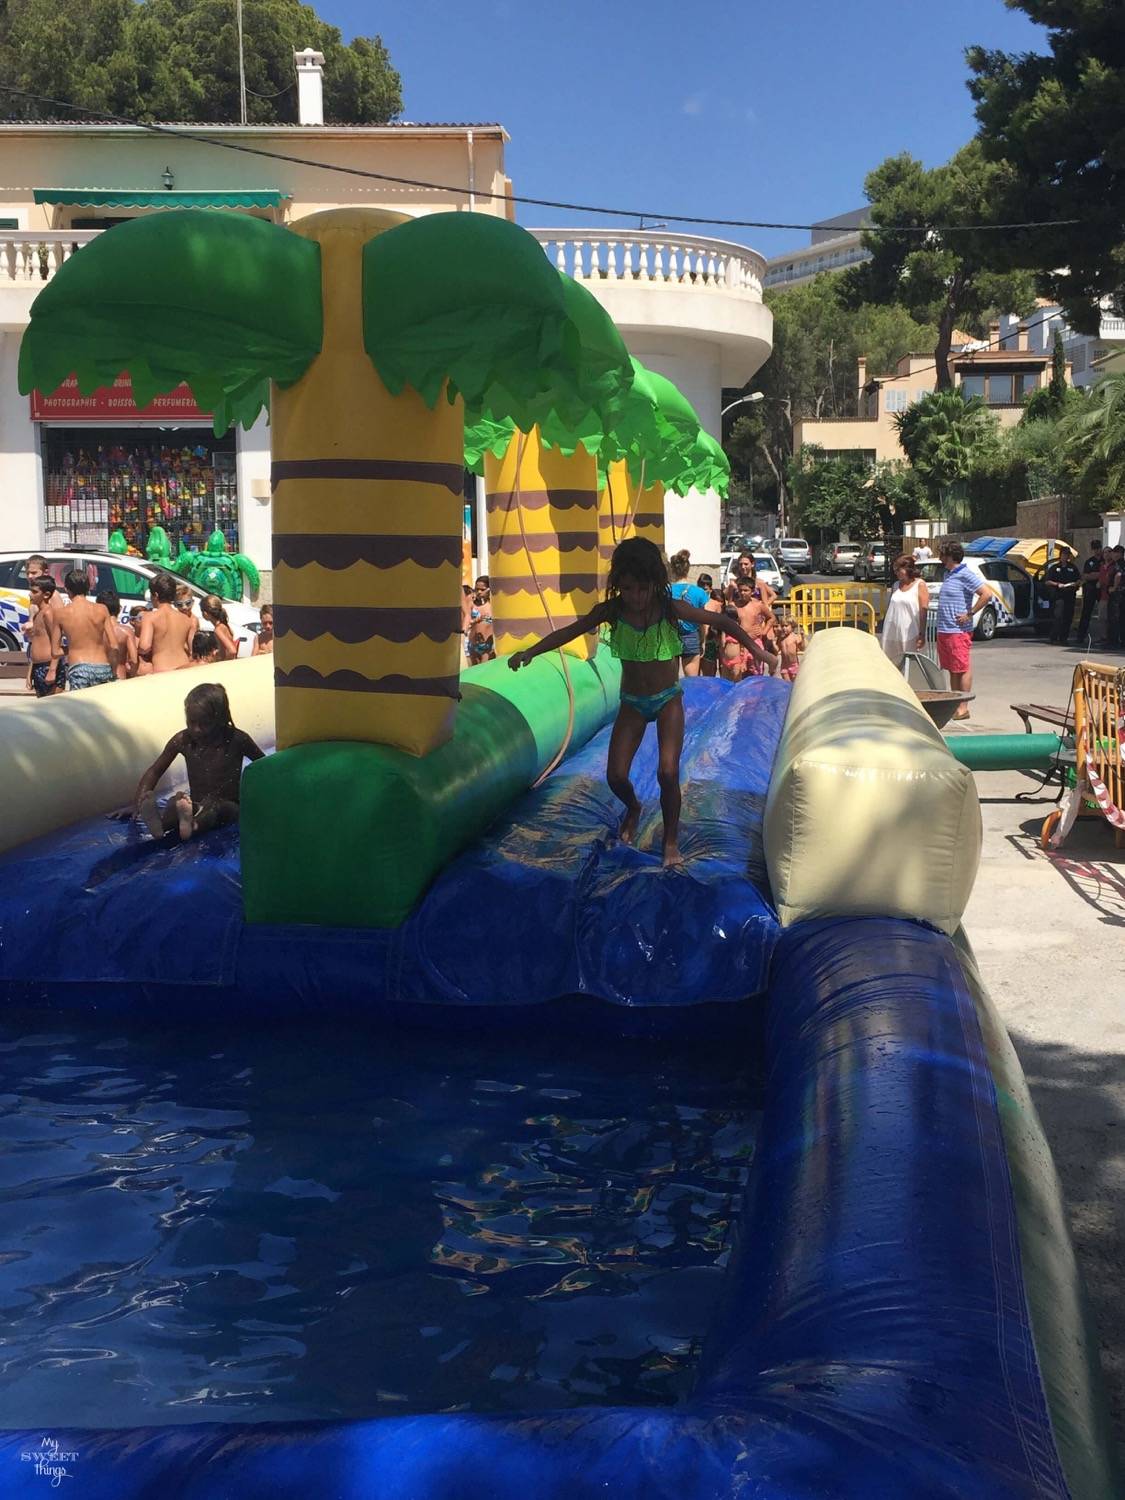 What to do in summer in Mallorca - Water games